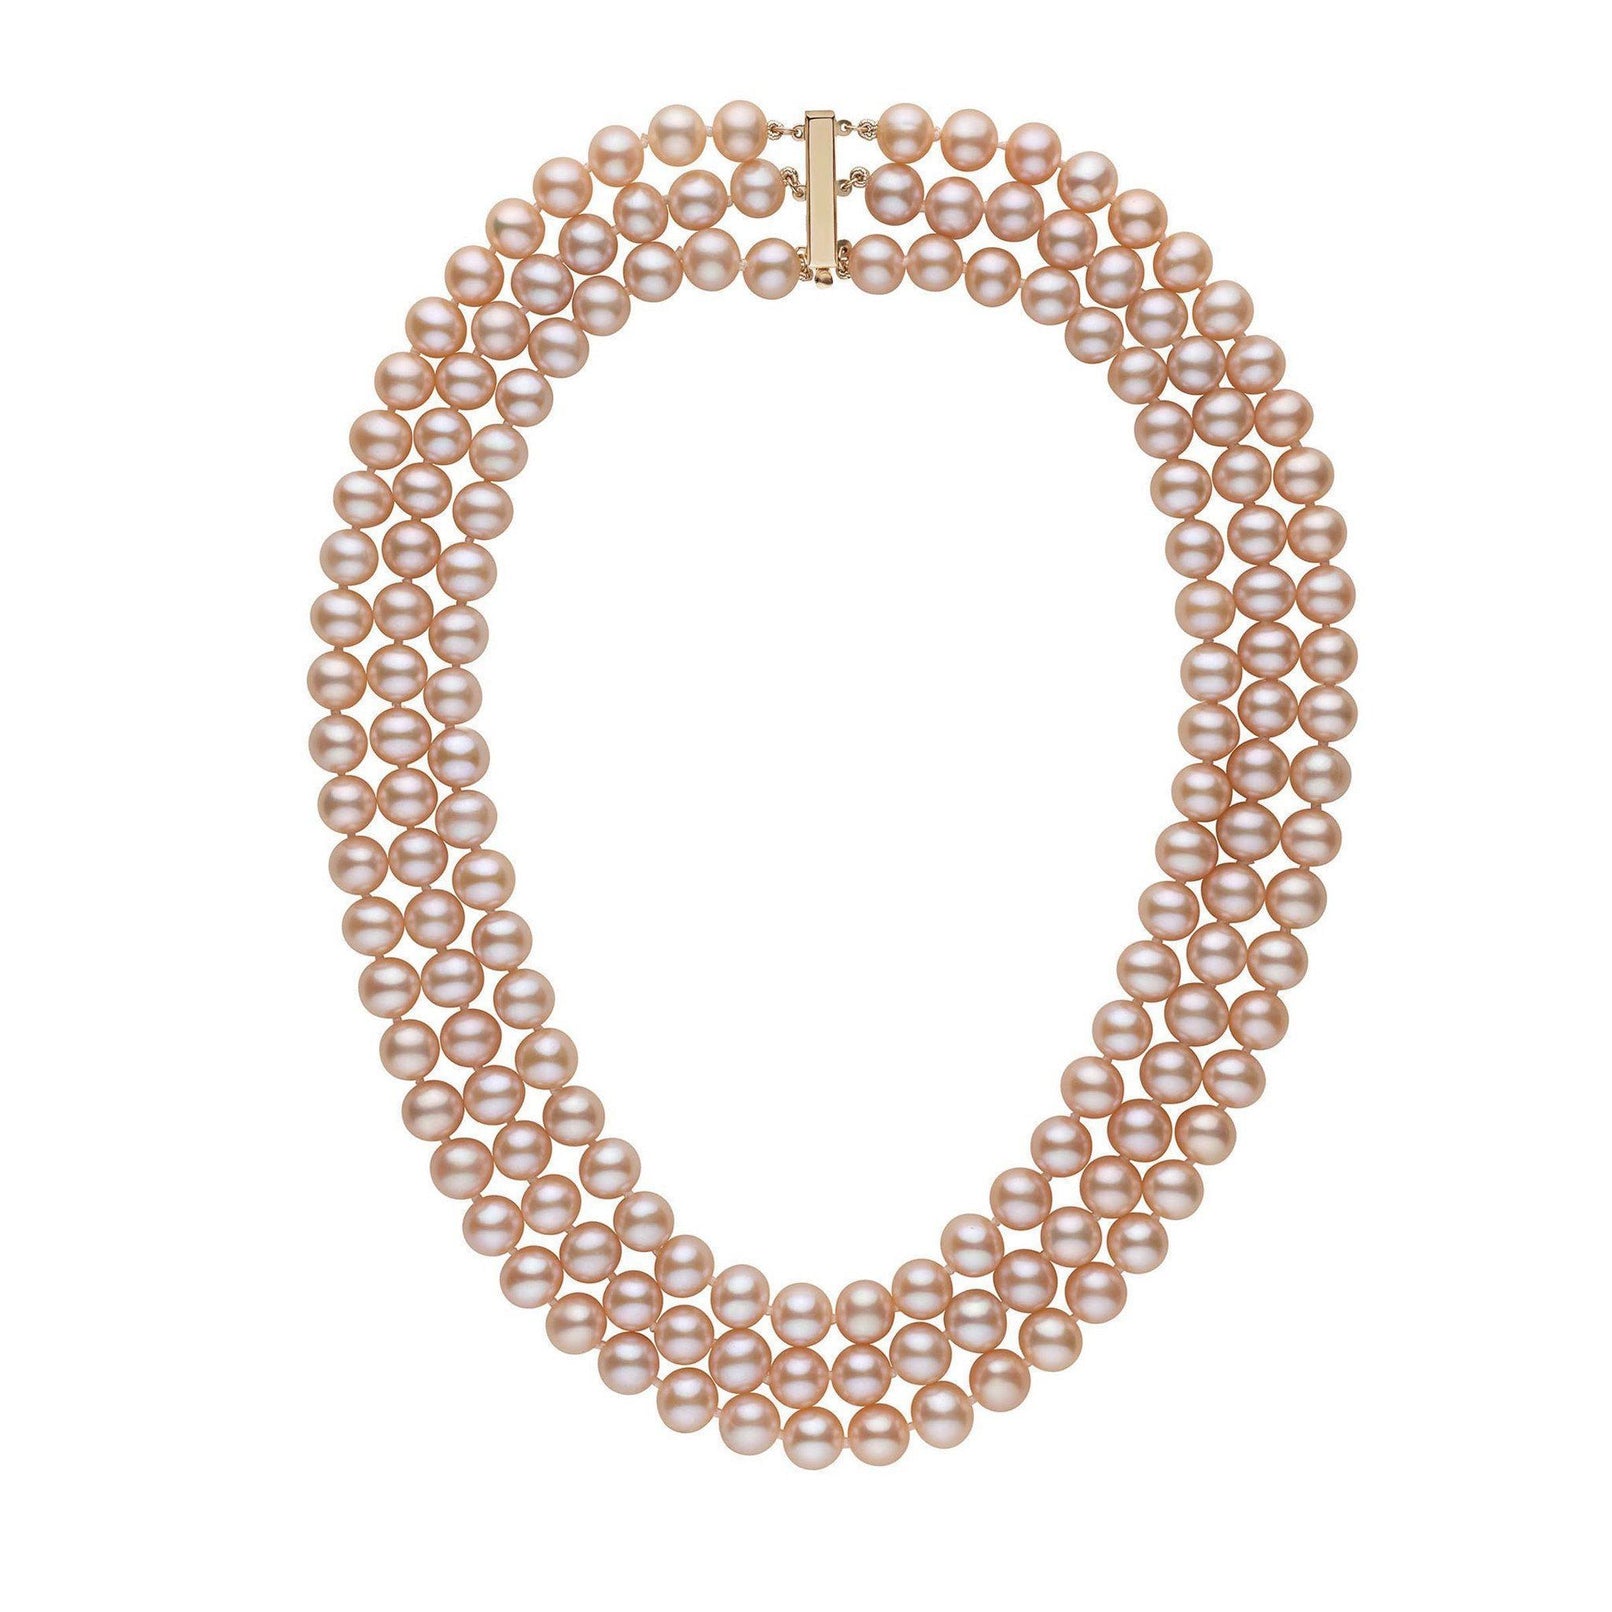 09- 8-9mm,A, tripple peach freshwater pearl necklace.jpg